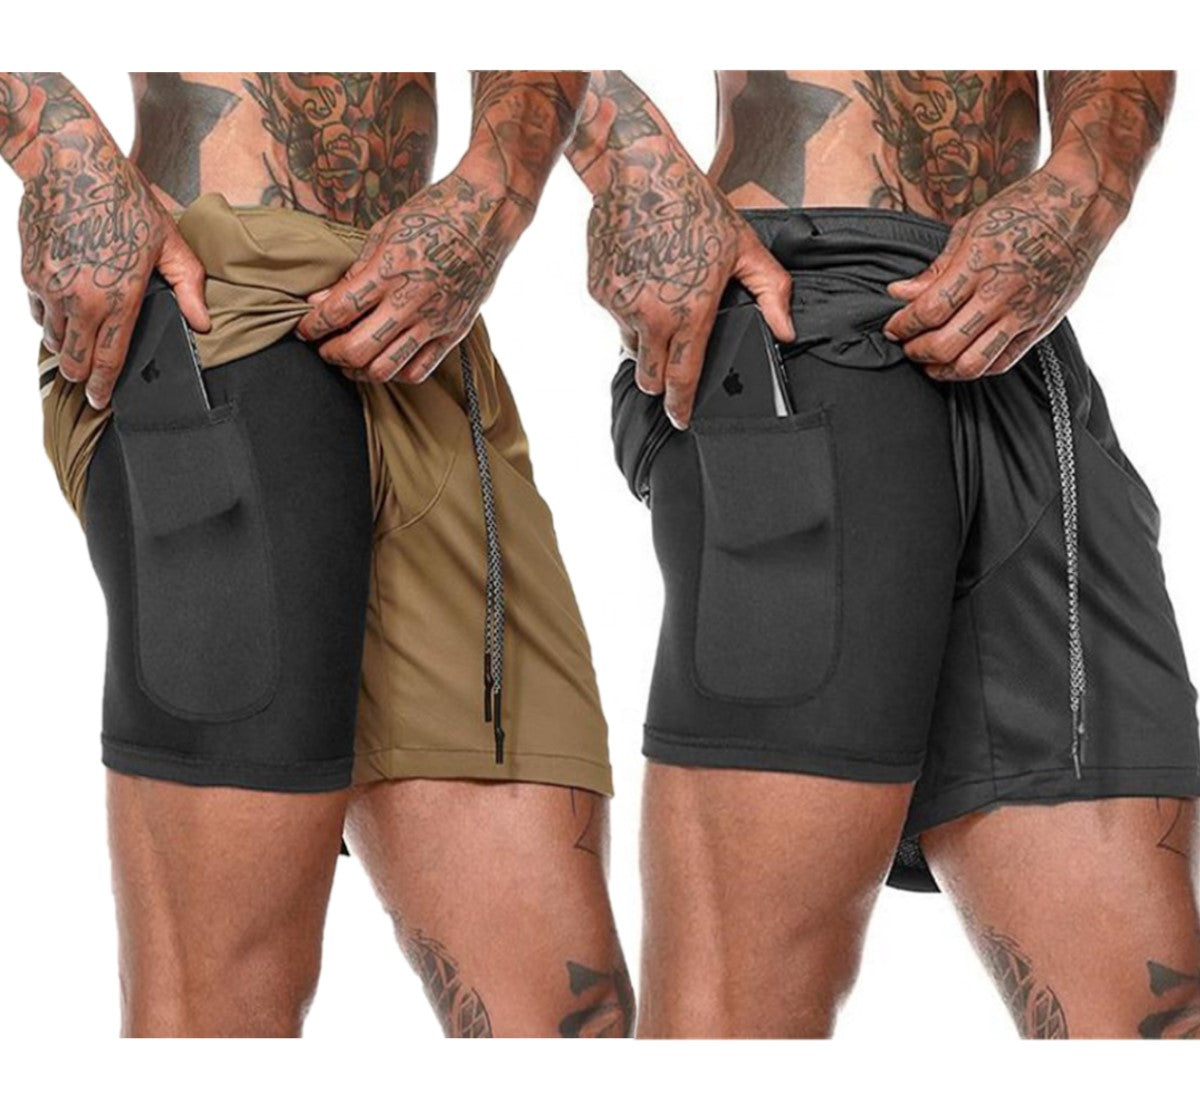 Men Gym Shorts / Workout Pants / Running Shorts / Sportswear/Fitness Training Pants with Liner